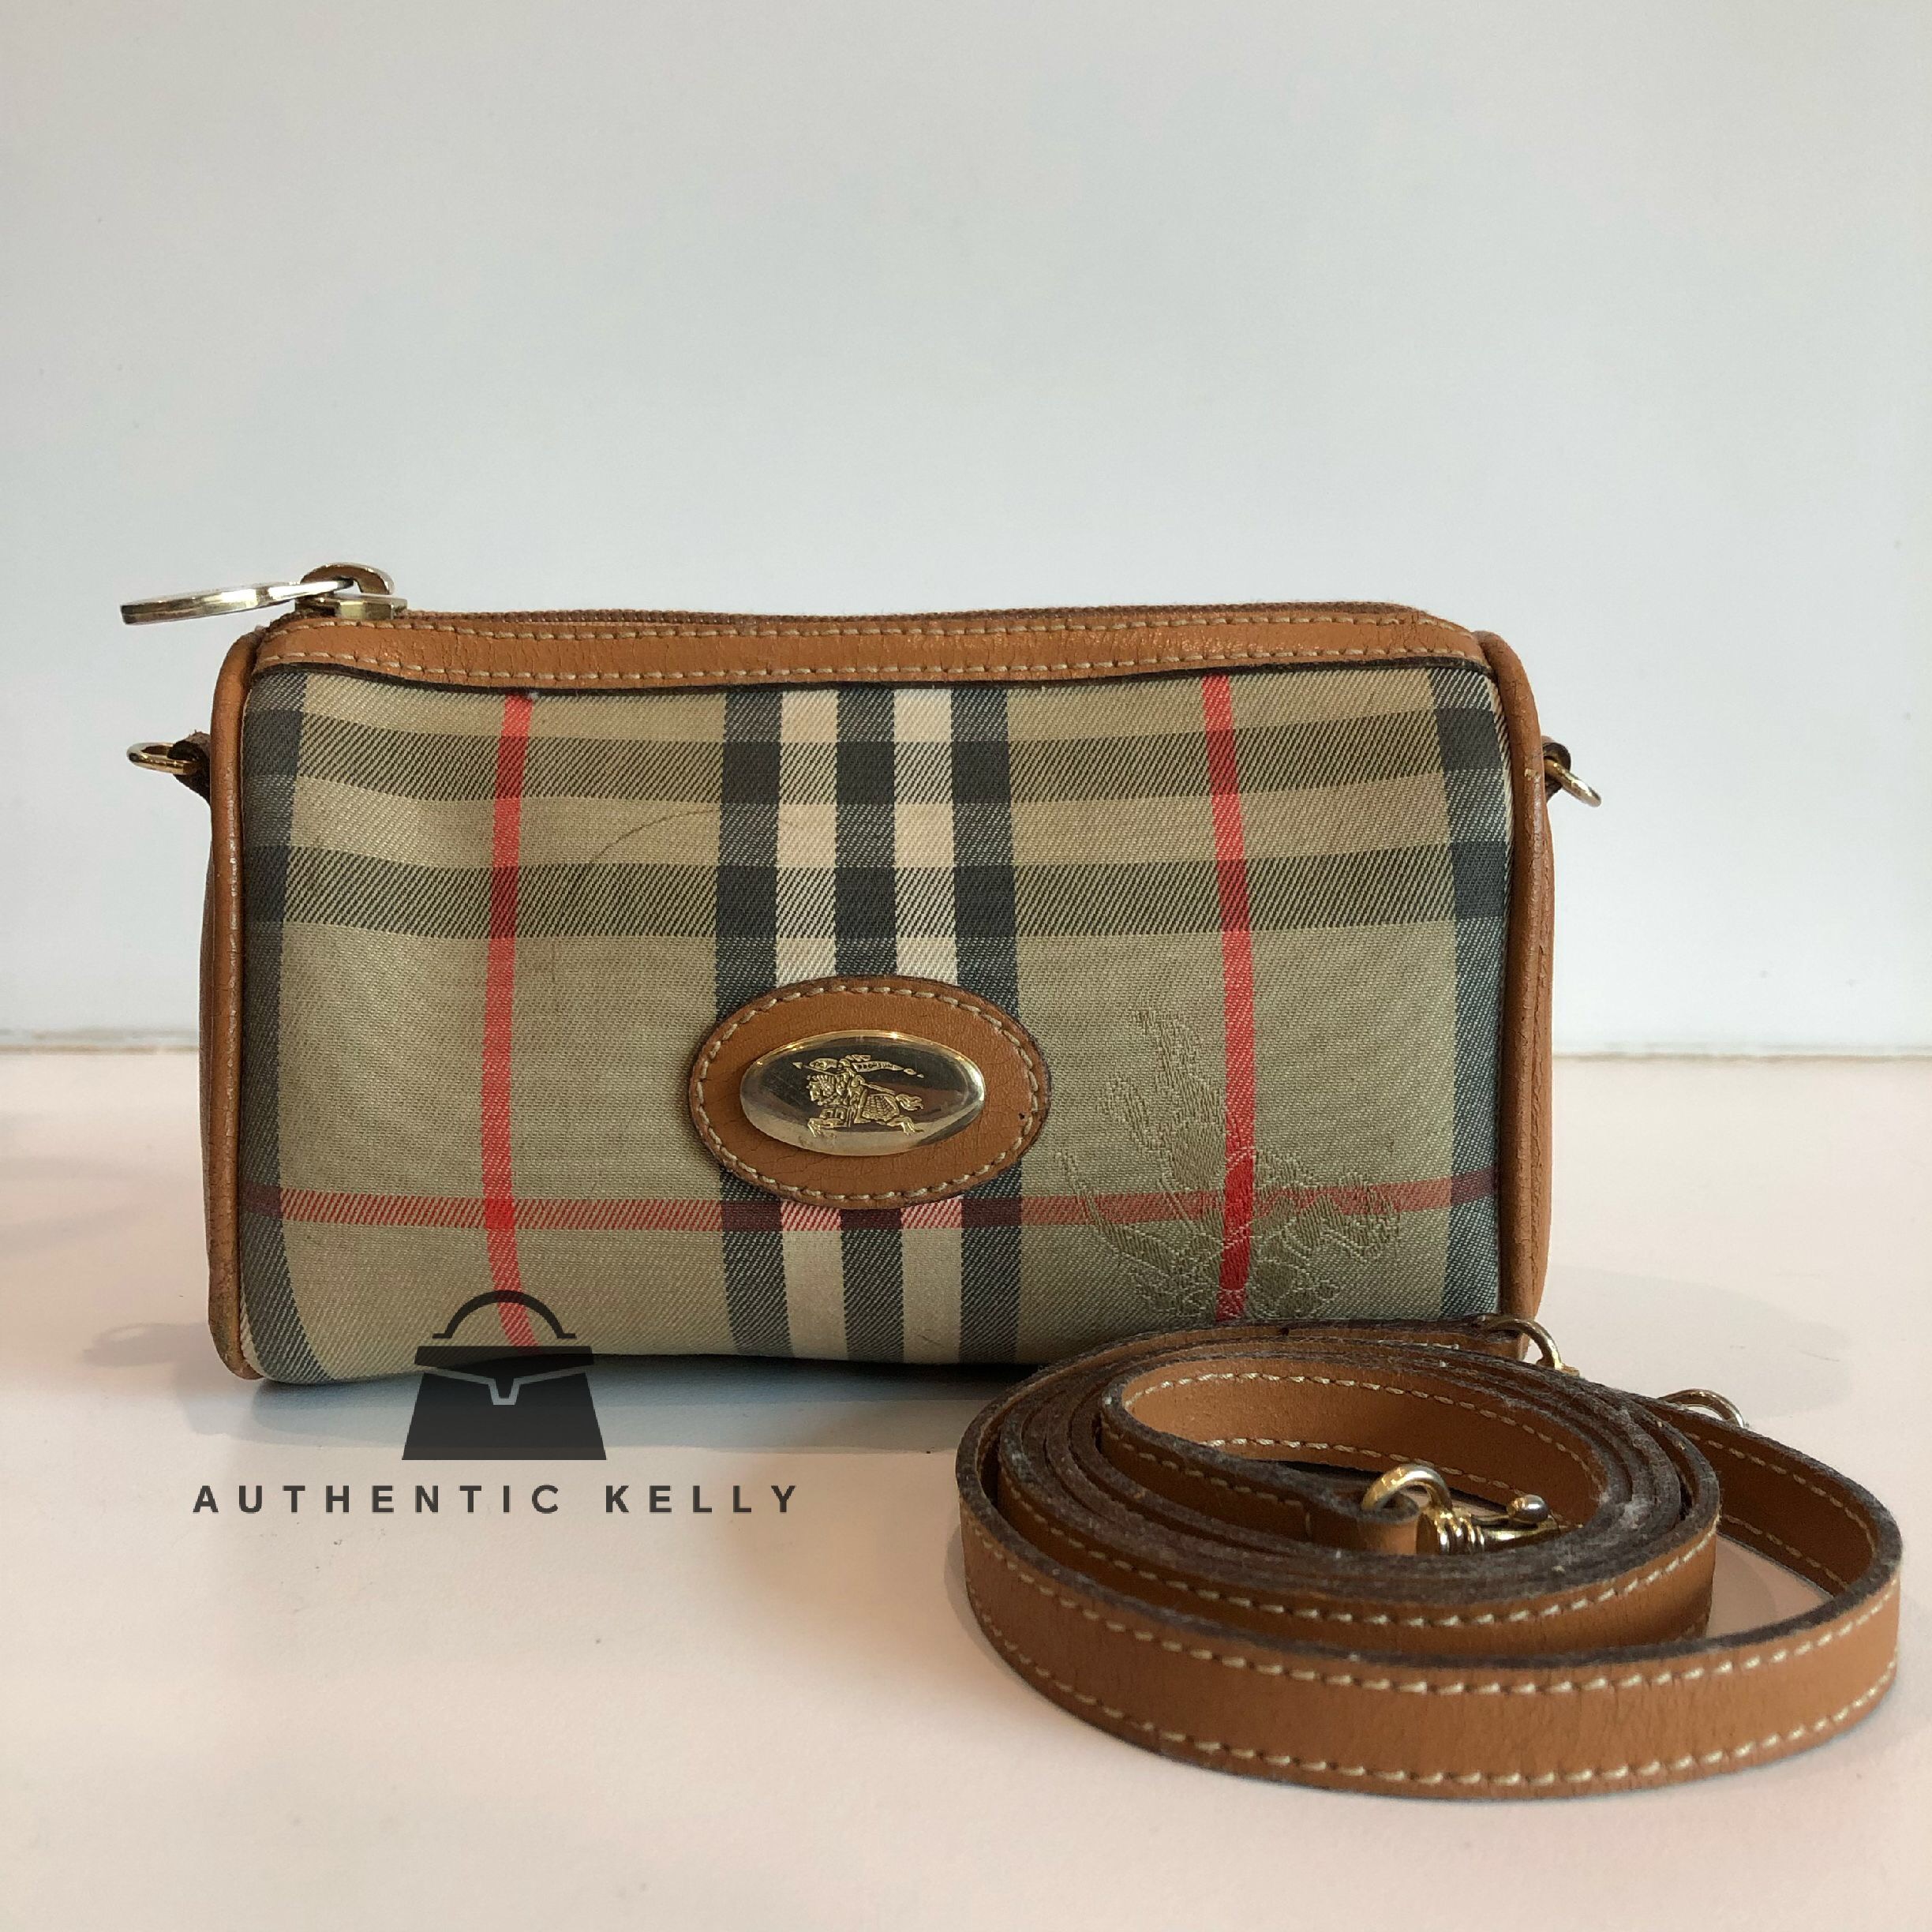 burberry small pouch